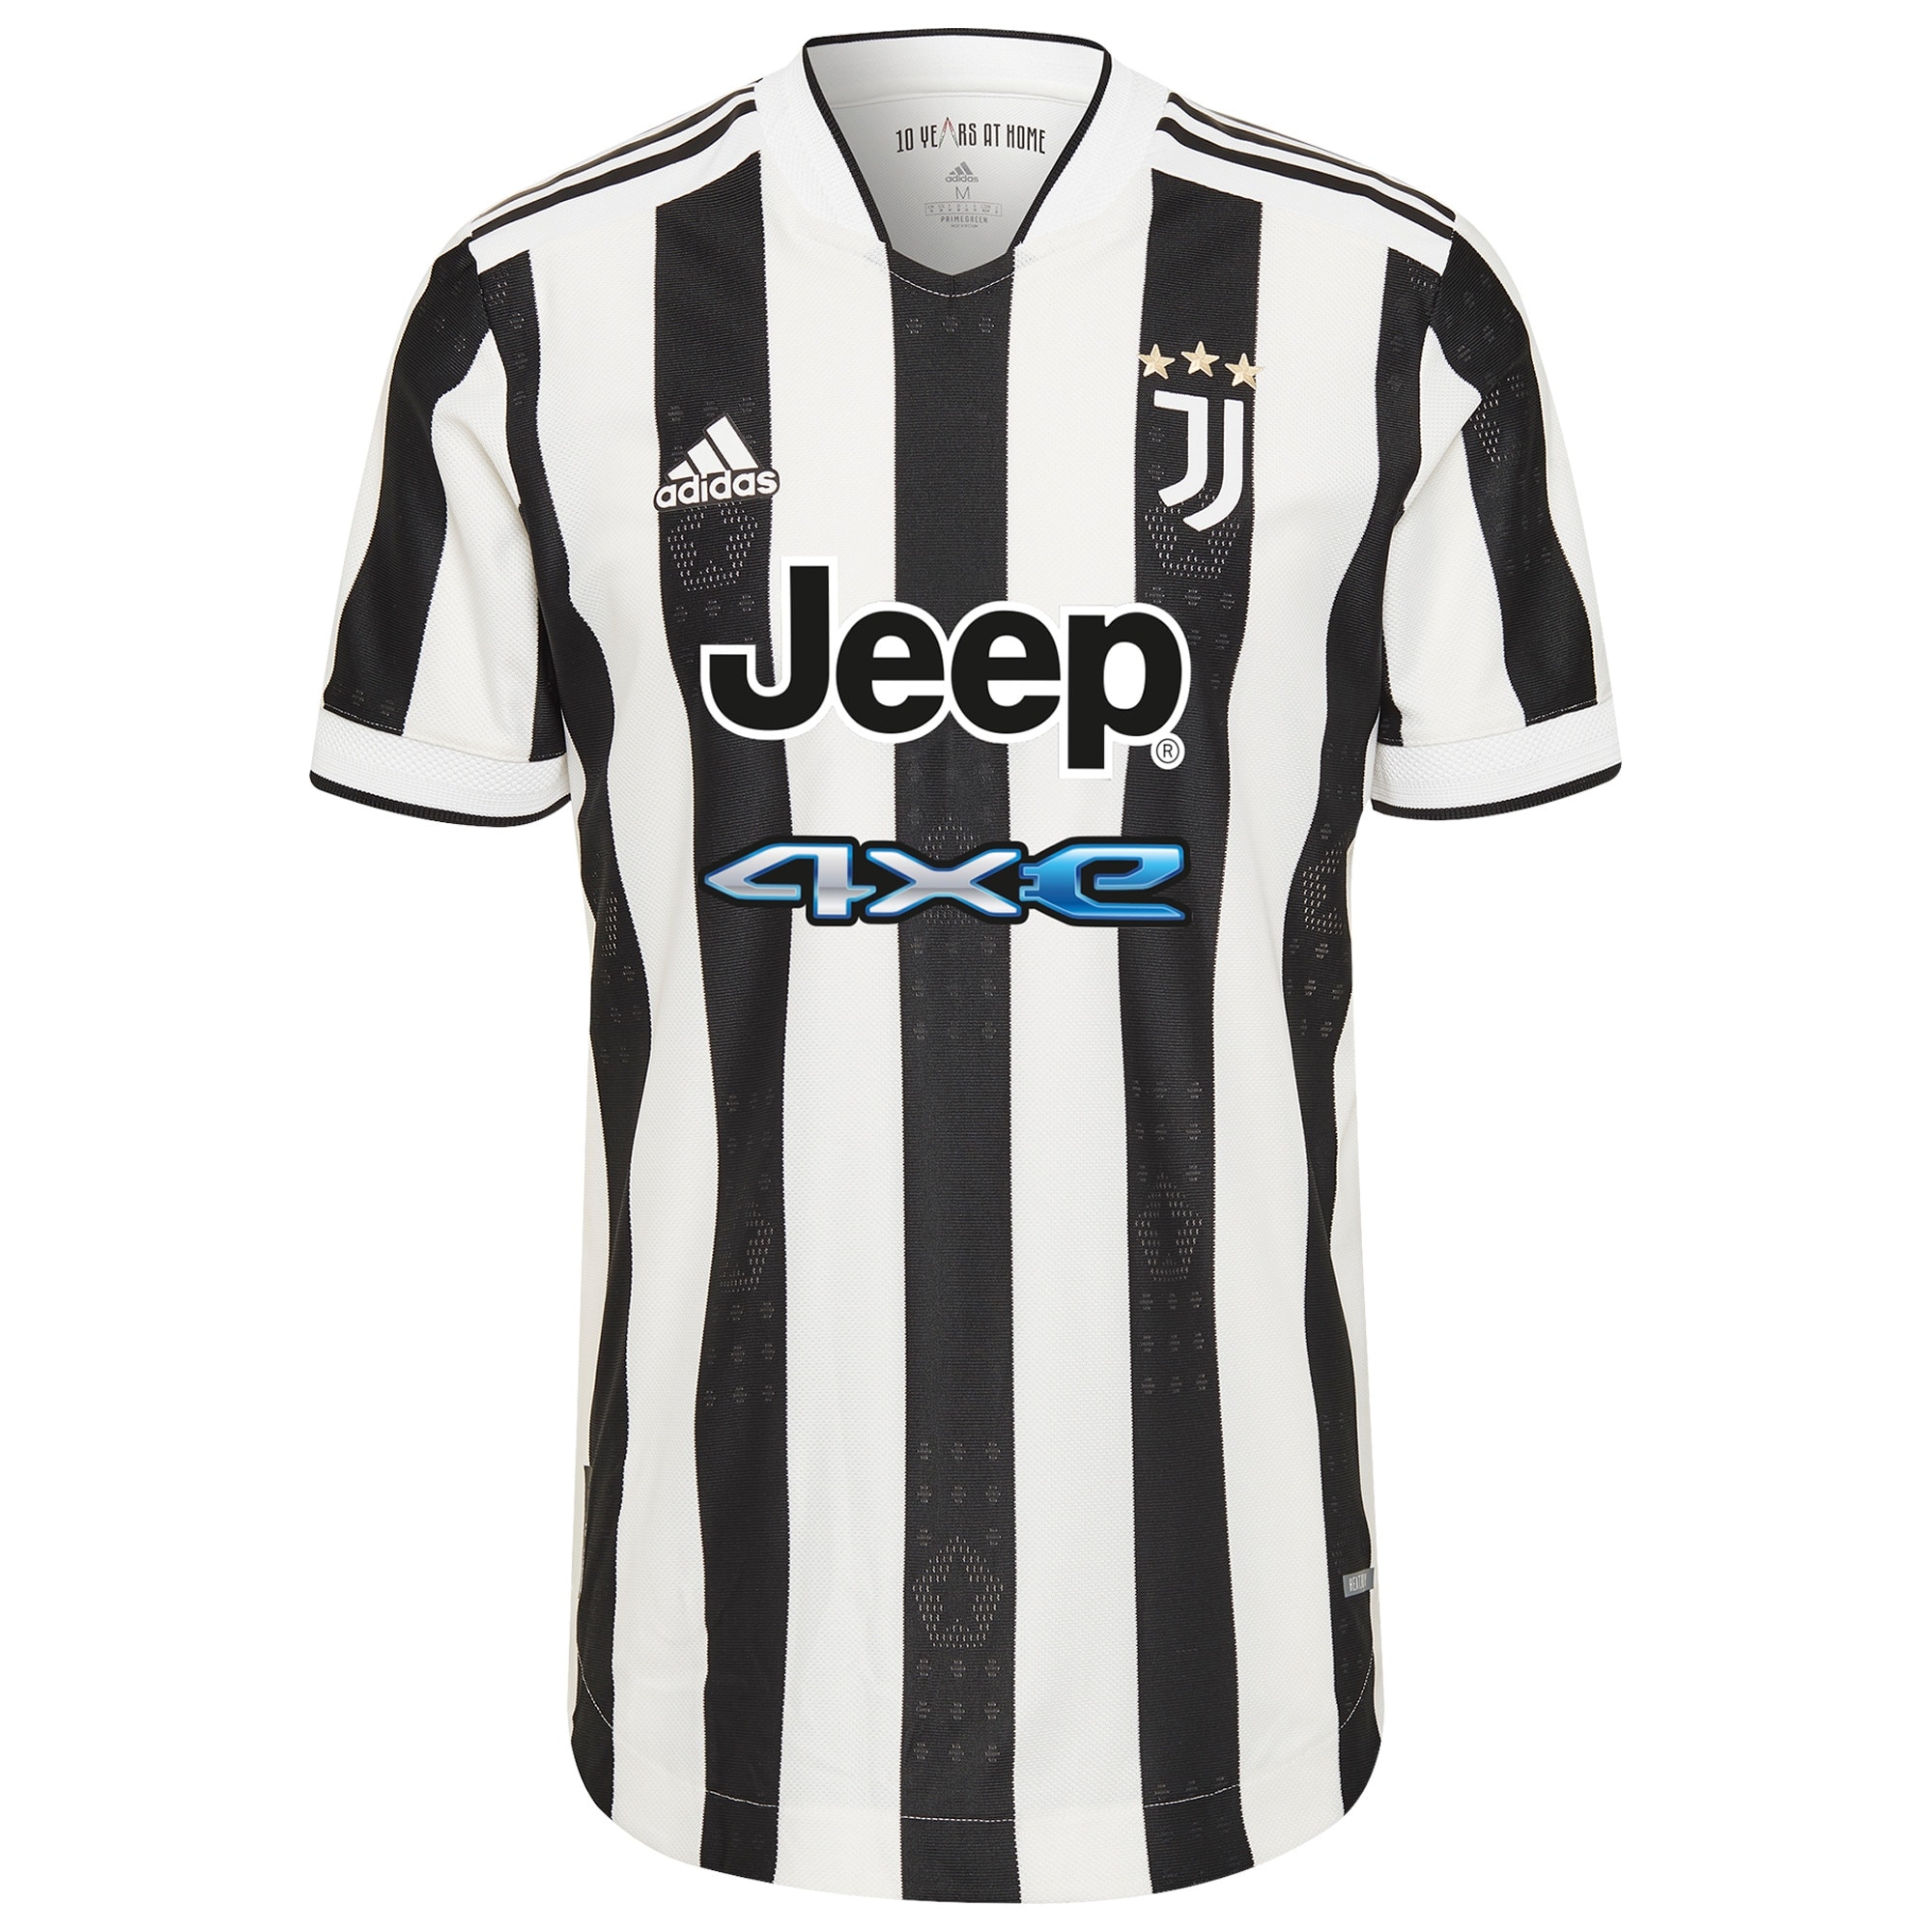 Juventus Home Authentic Shirt 2021-22 with De Ligt 4 printing